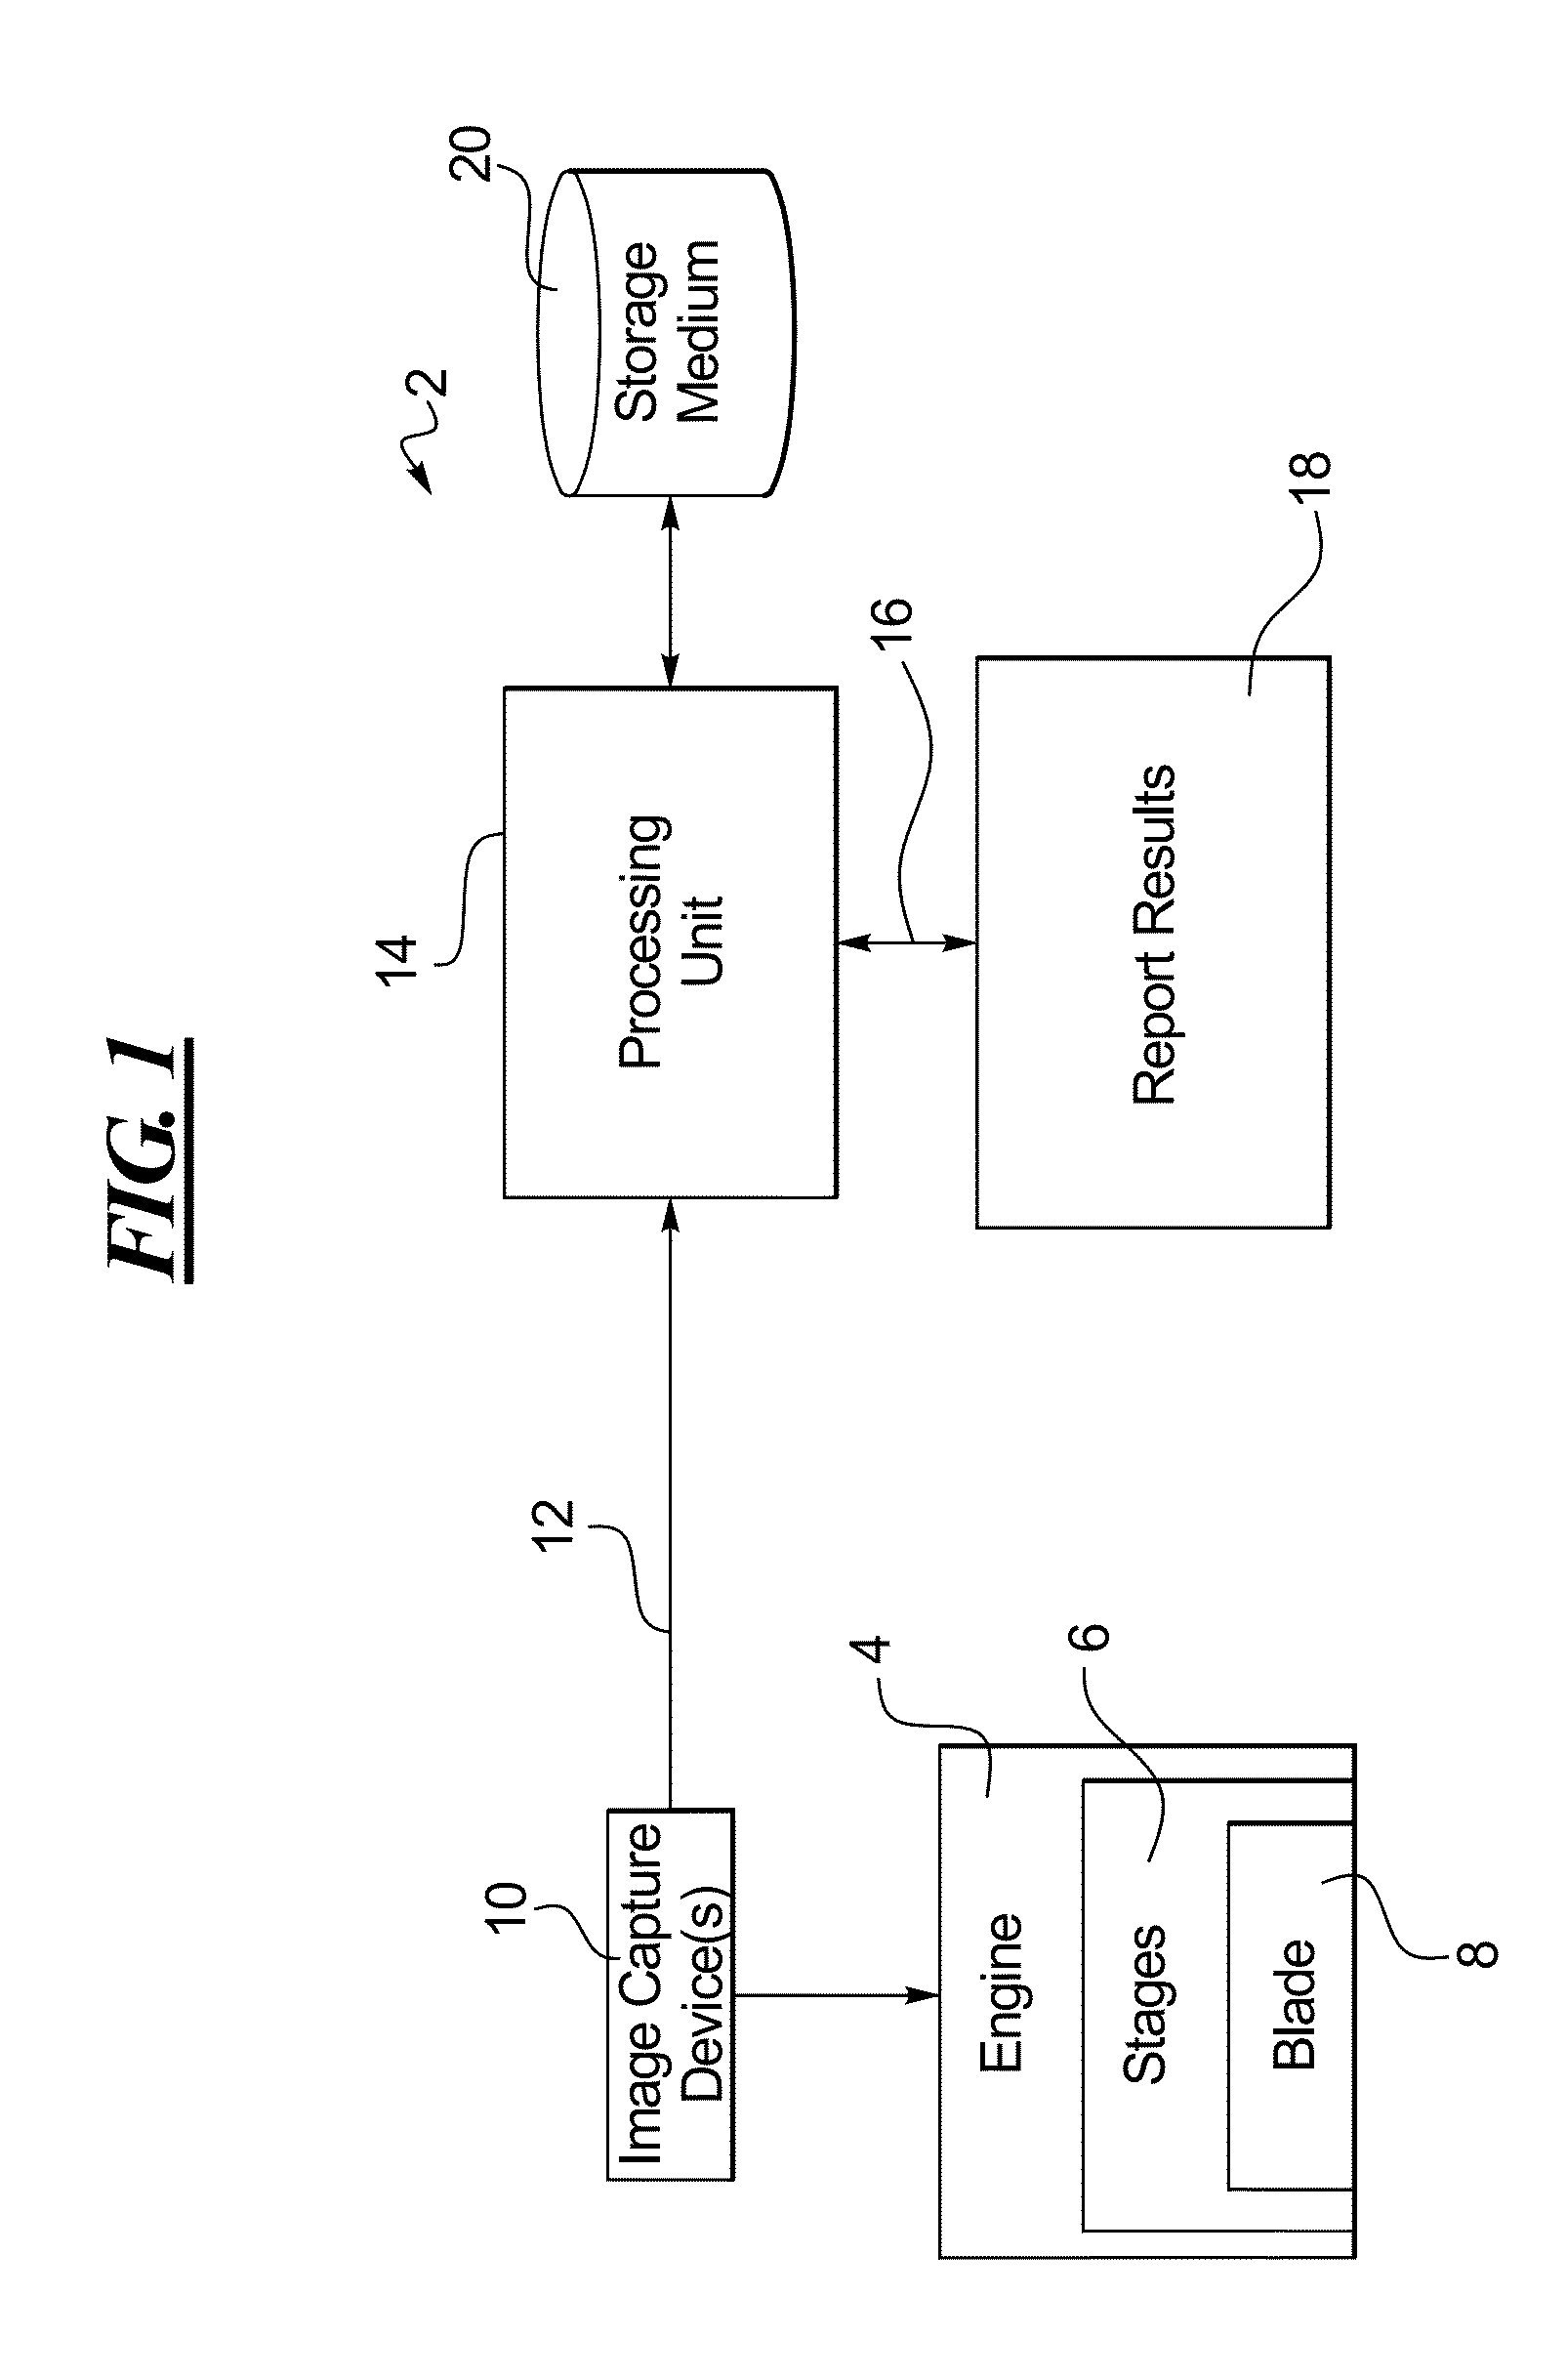 Method and system for automated defect detection